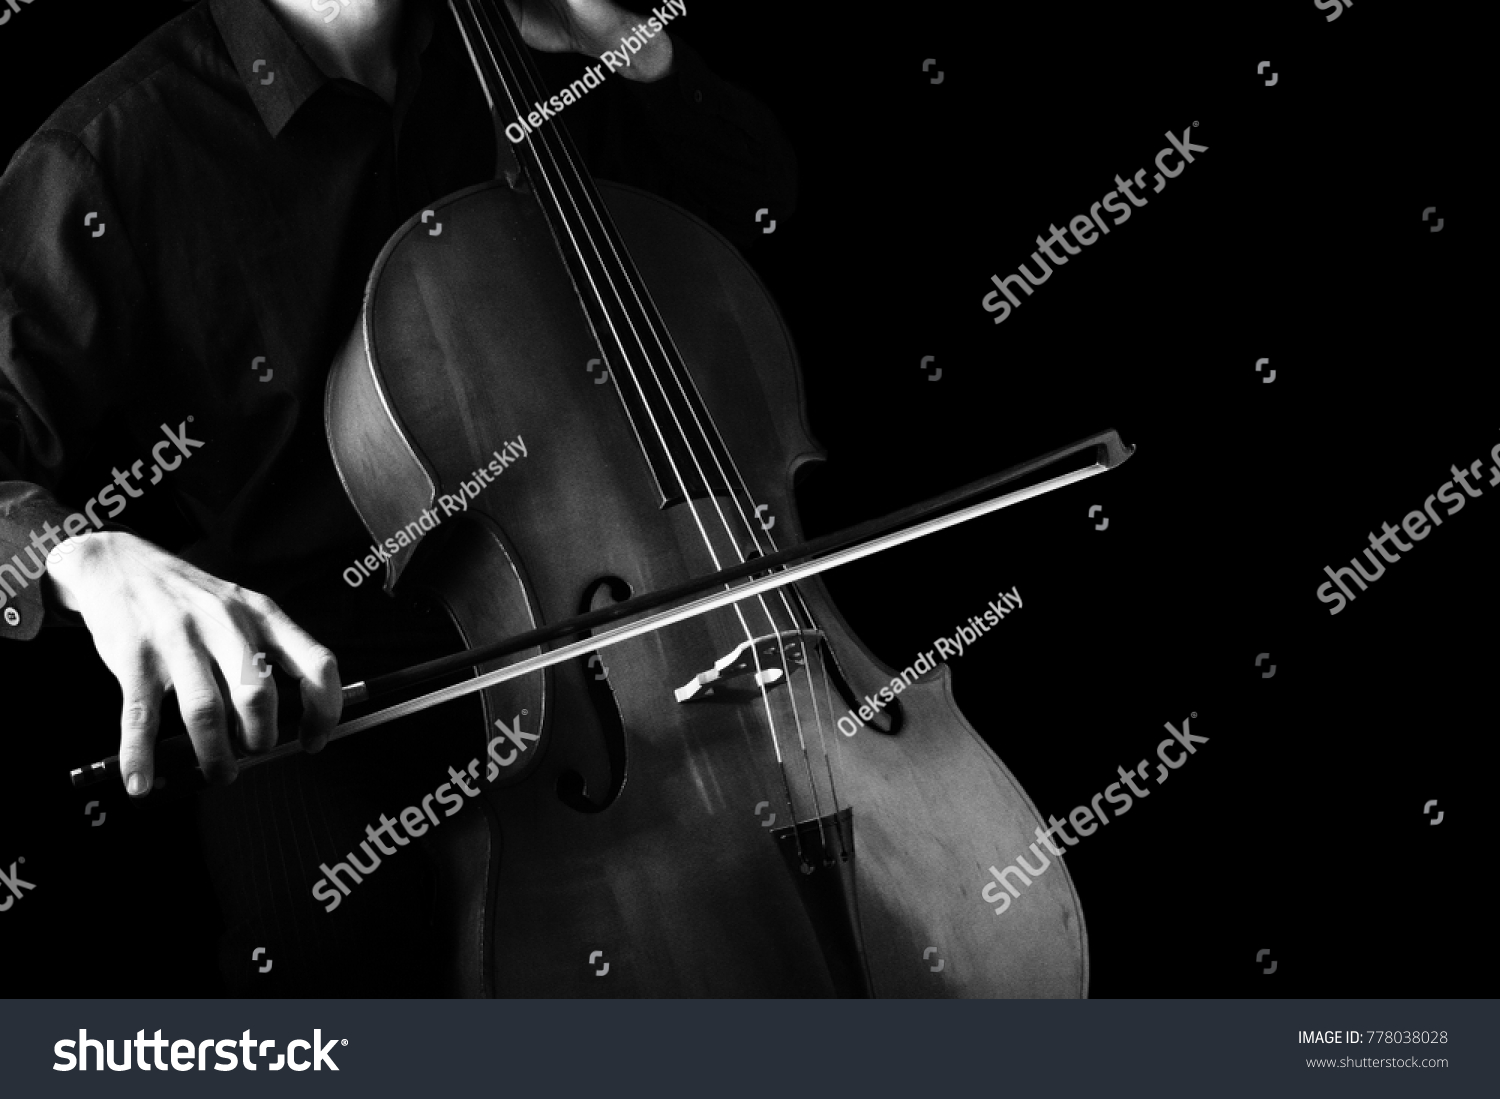 Man playing on cello on black background. String instruments #778038028